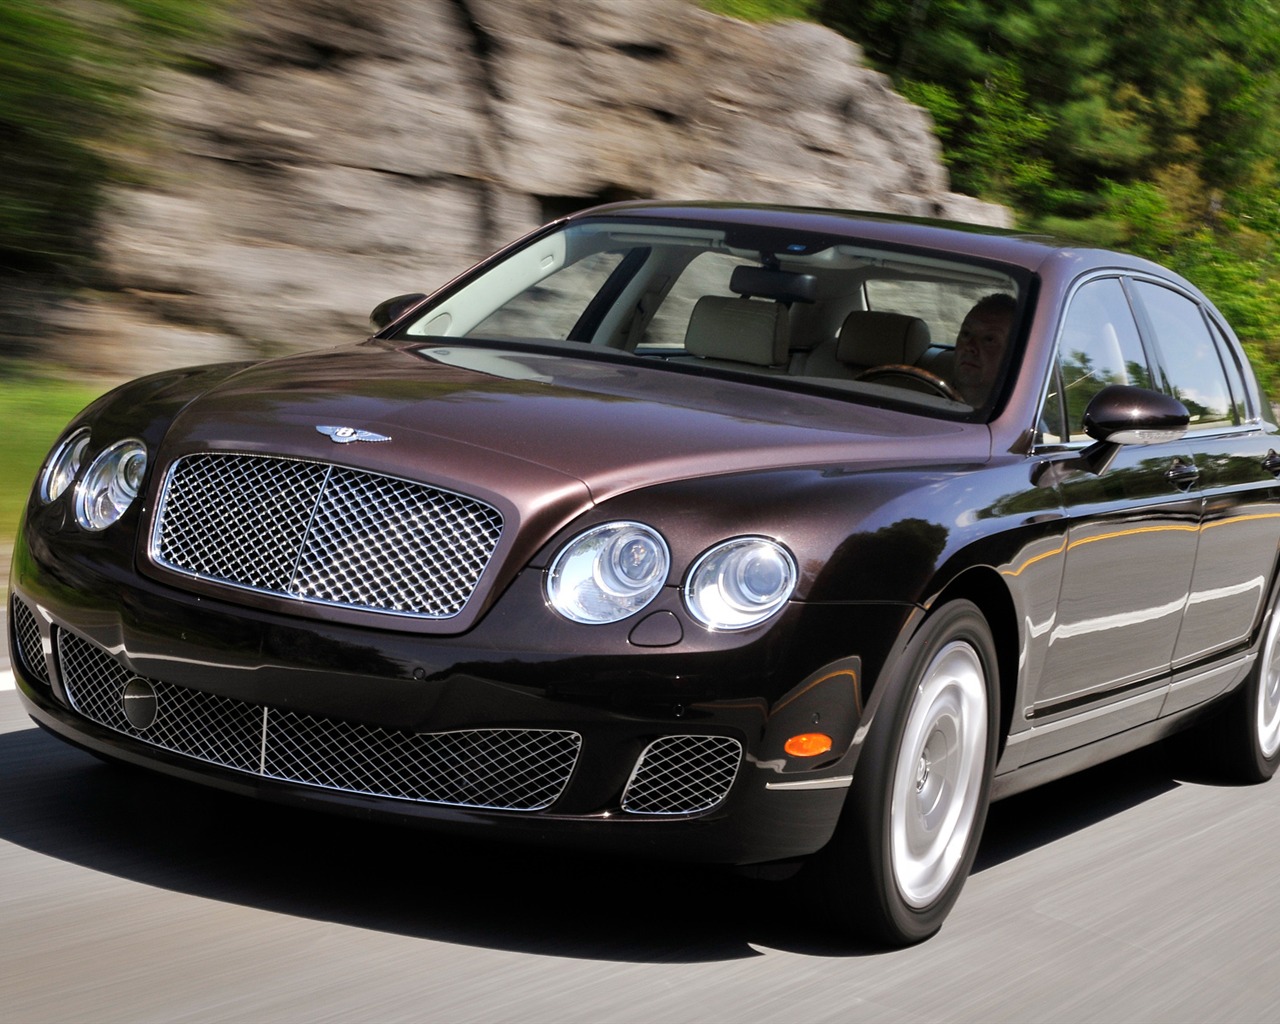 Bentley Continental Flying Spur - 2008 宾利16 - 1280x1024